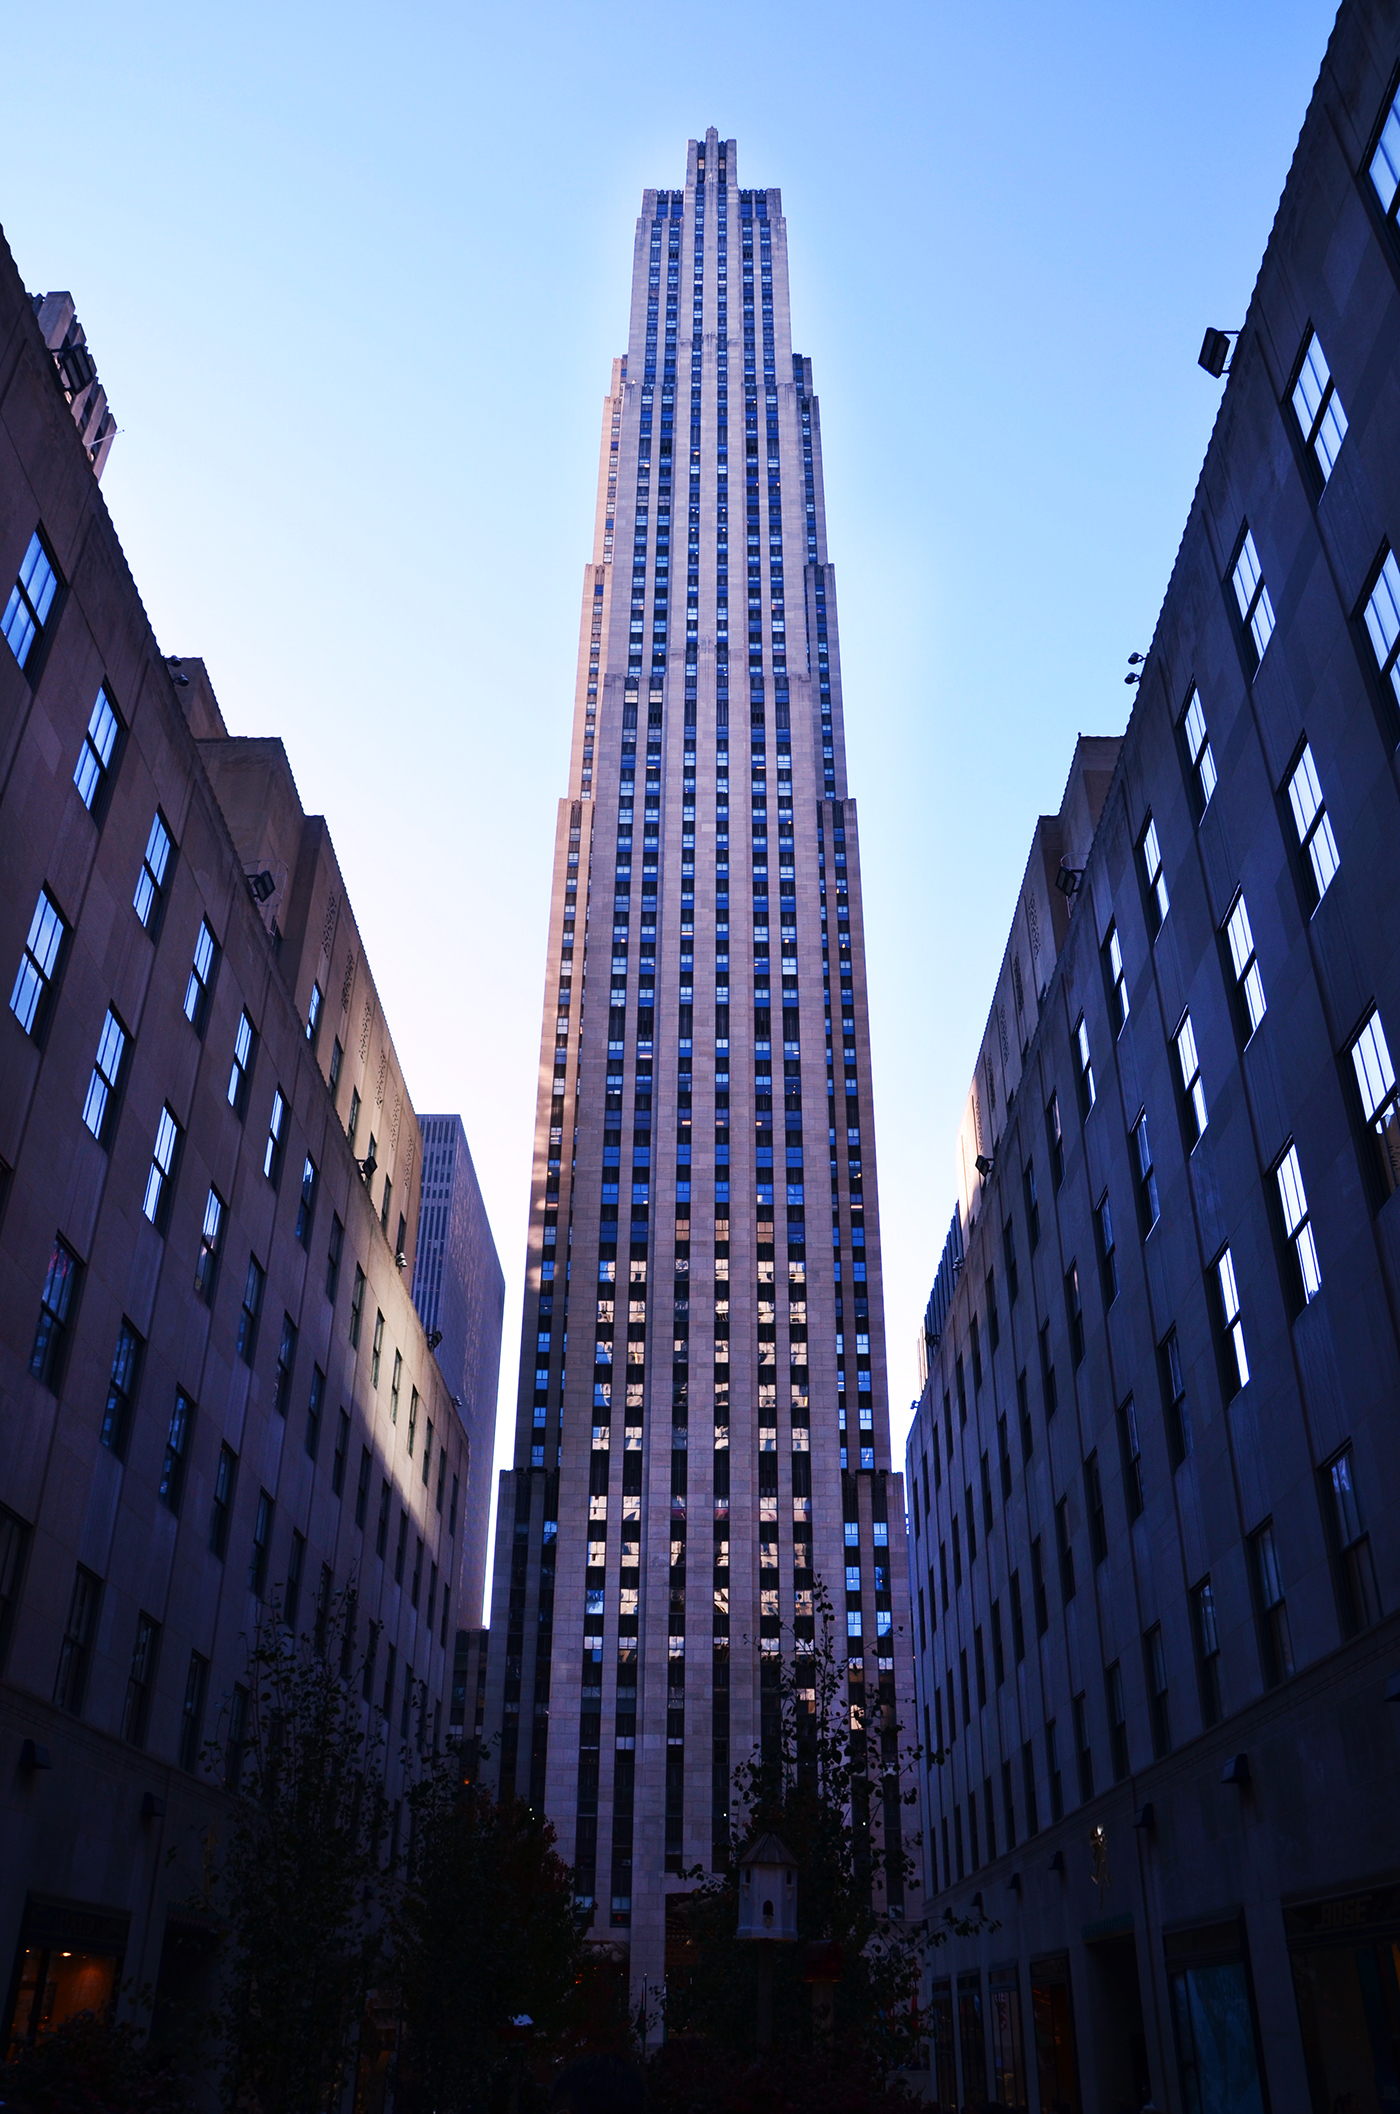 indentity design logo New York nyc minmalist Packaging tower Empire States Building rockefeller center